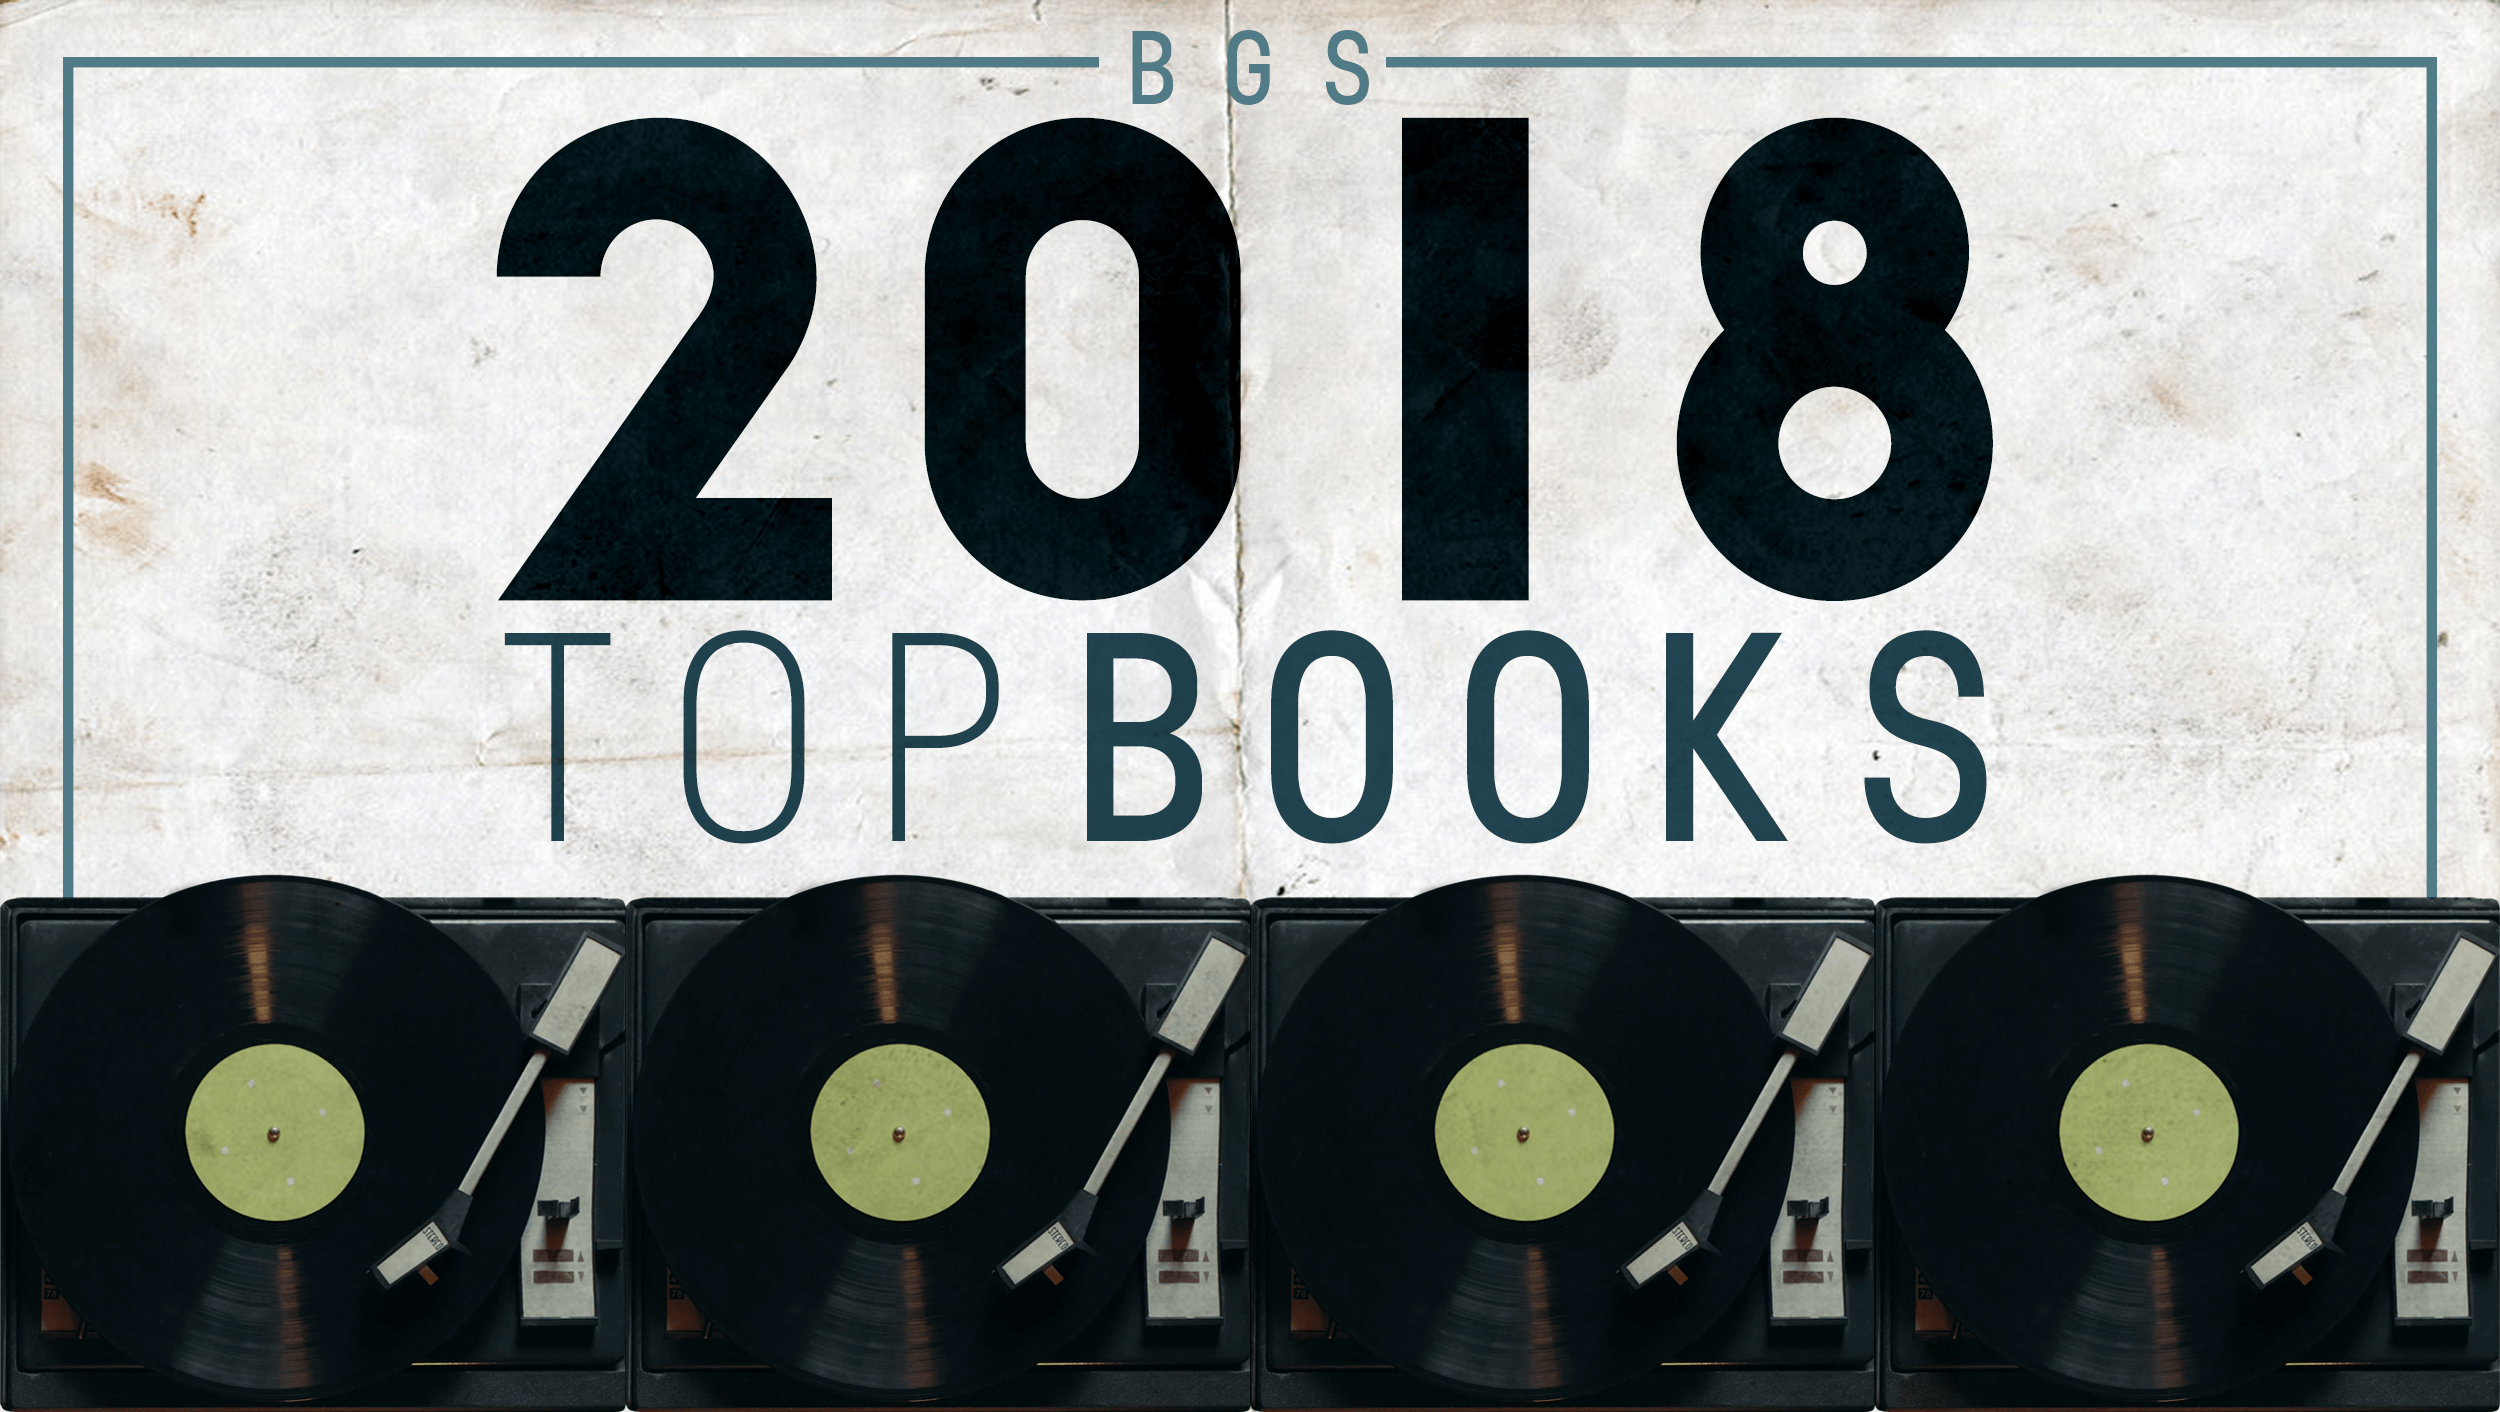 BGS Top Books of 2018